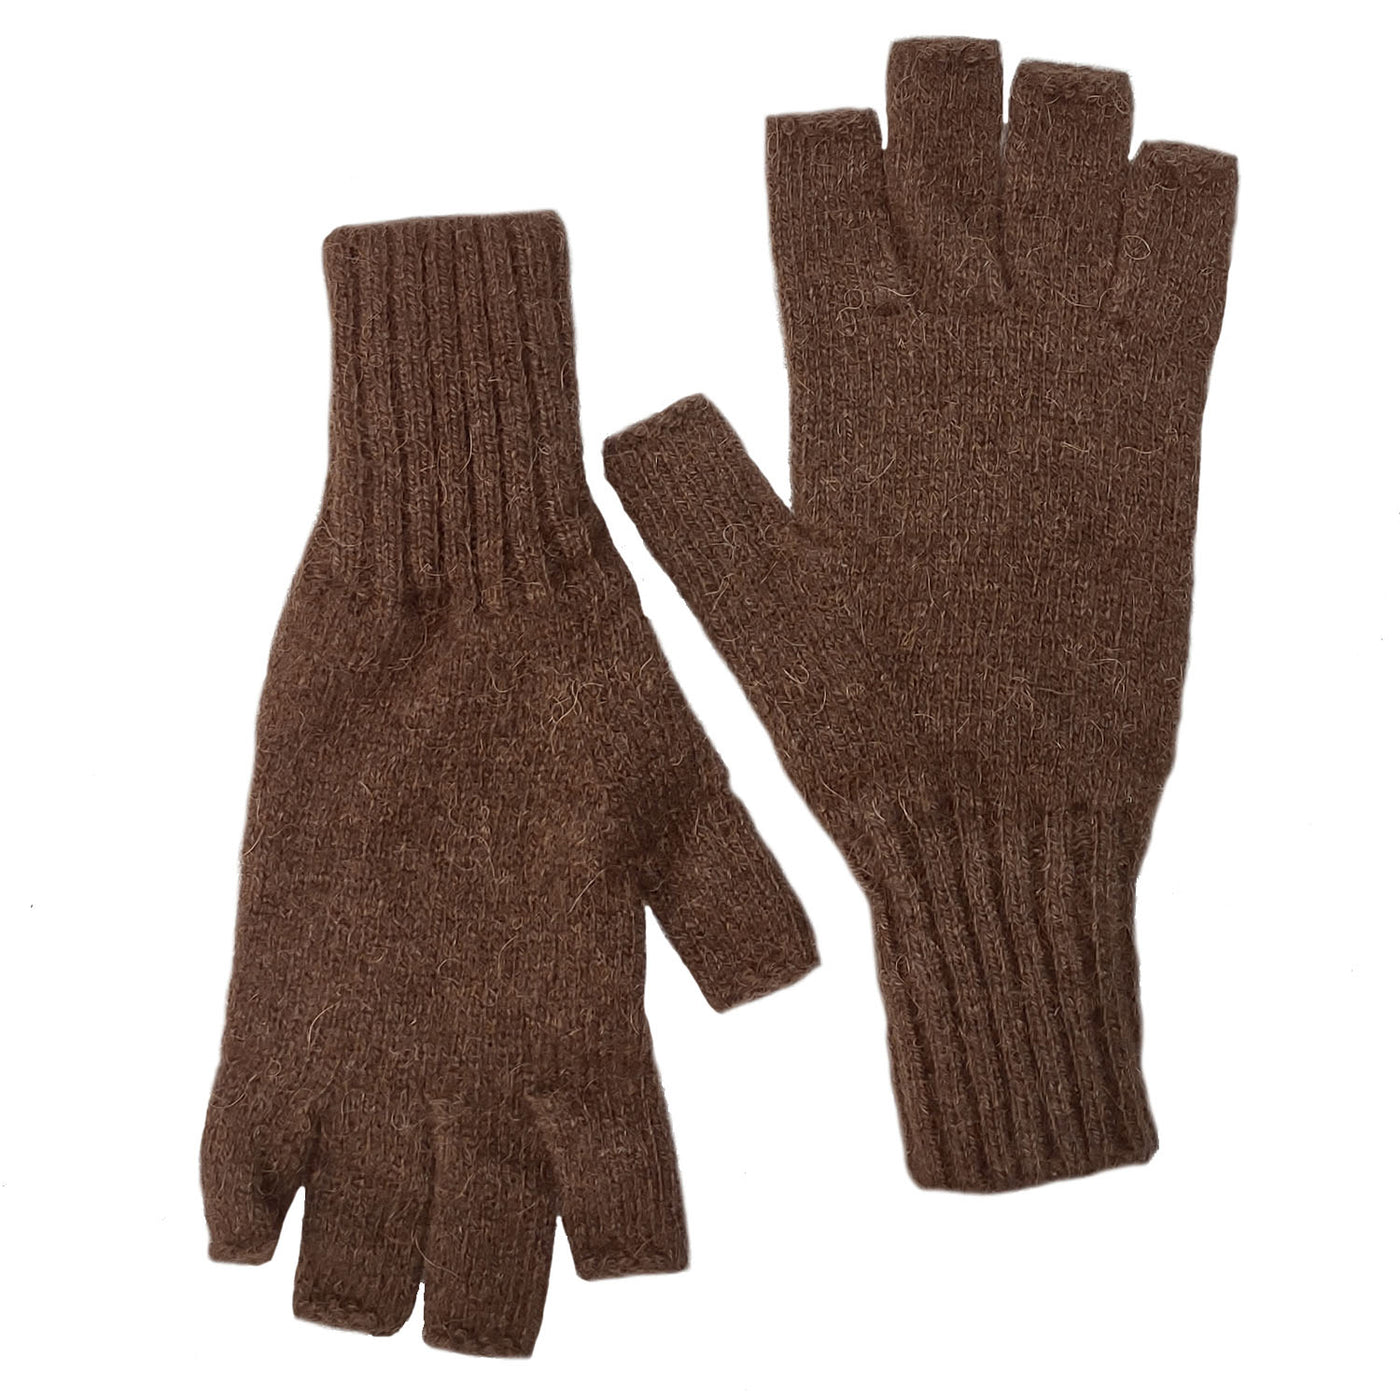 The Buffalo Wool Co. Extreme Gear Fingerless Bison Down Gloves